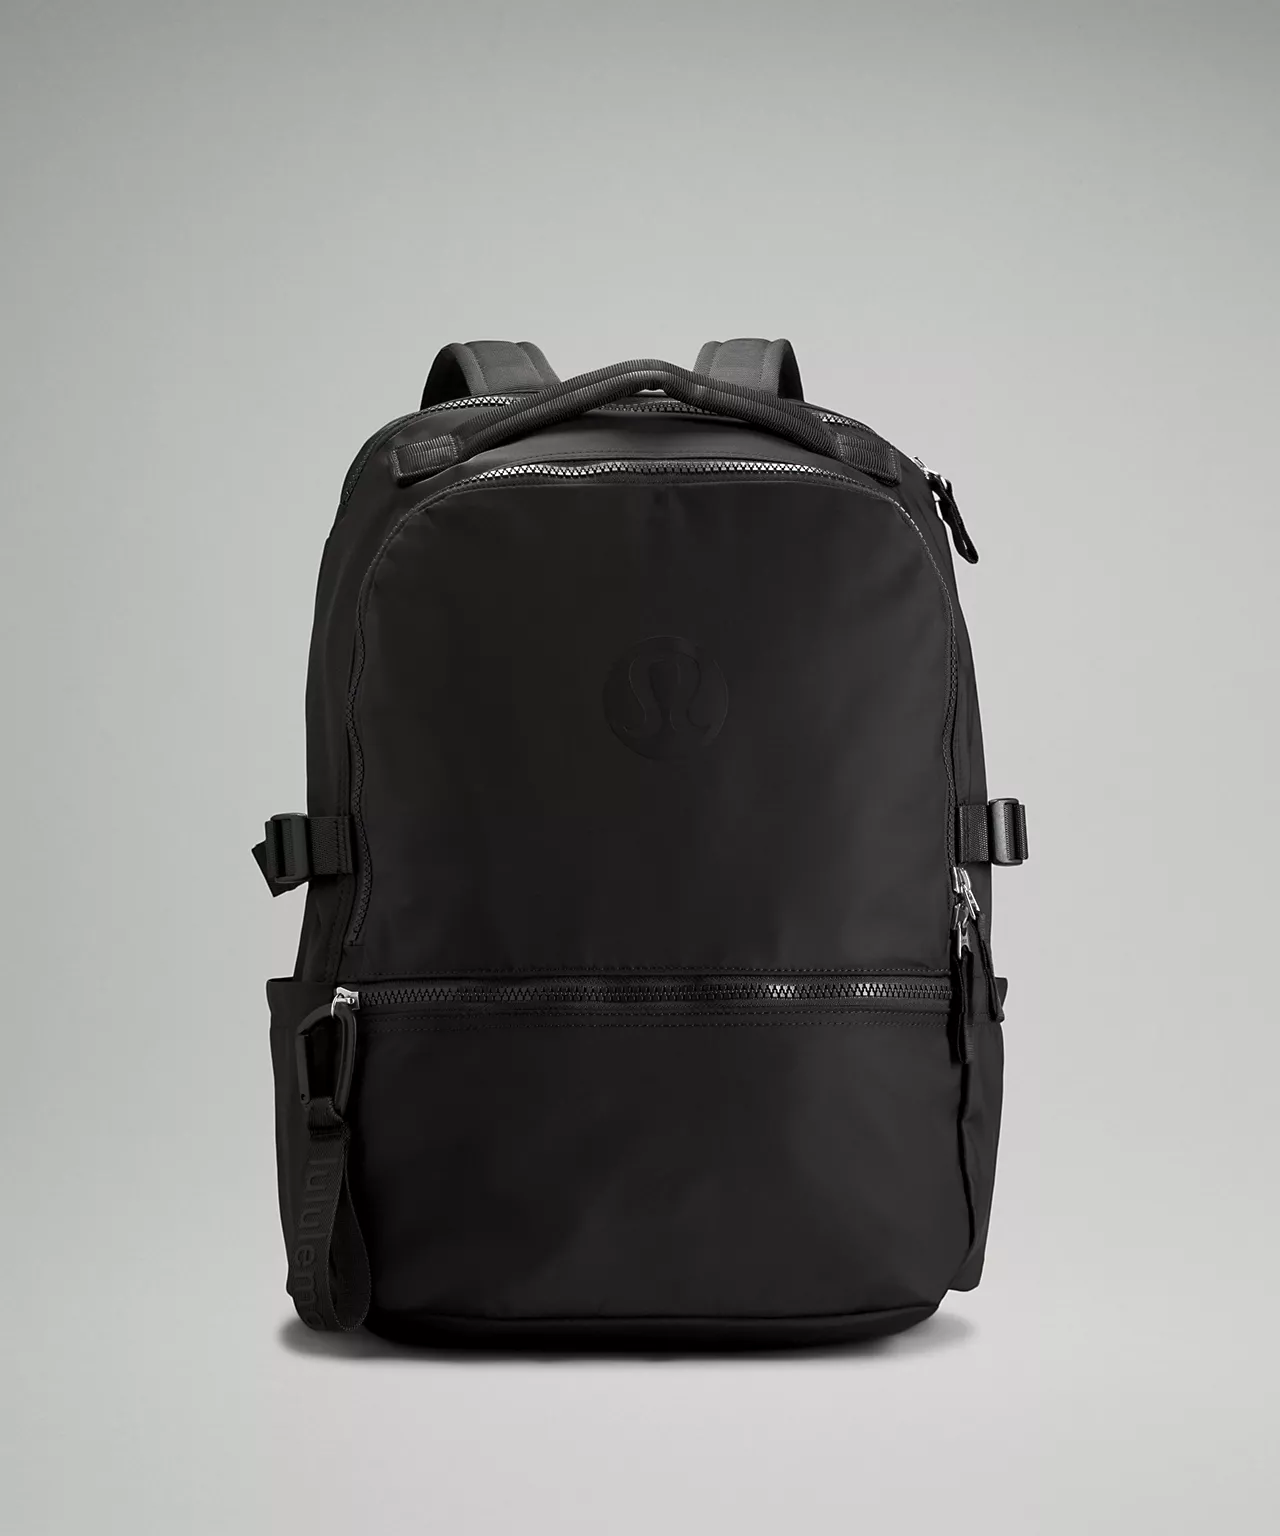 Unlock Wilderness' choice in the Lululemon Vs North Face comparison, the New Crew Backpack 22L by Lululemon